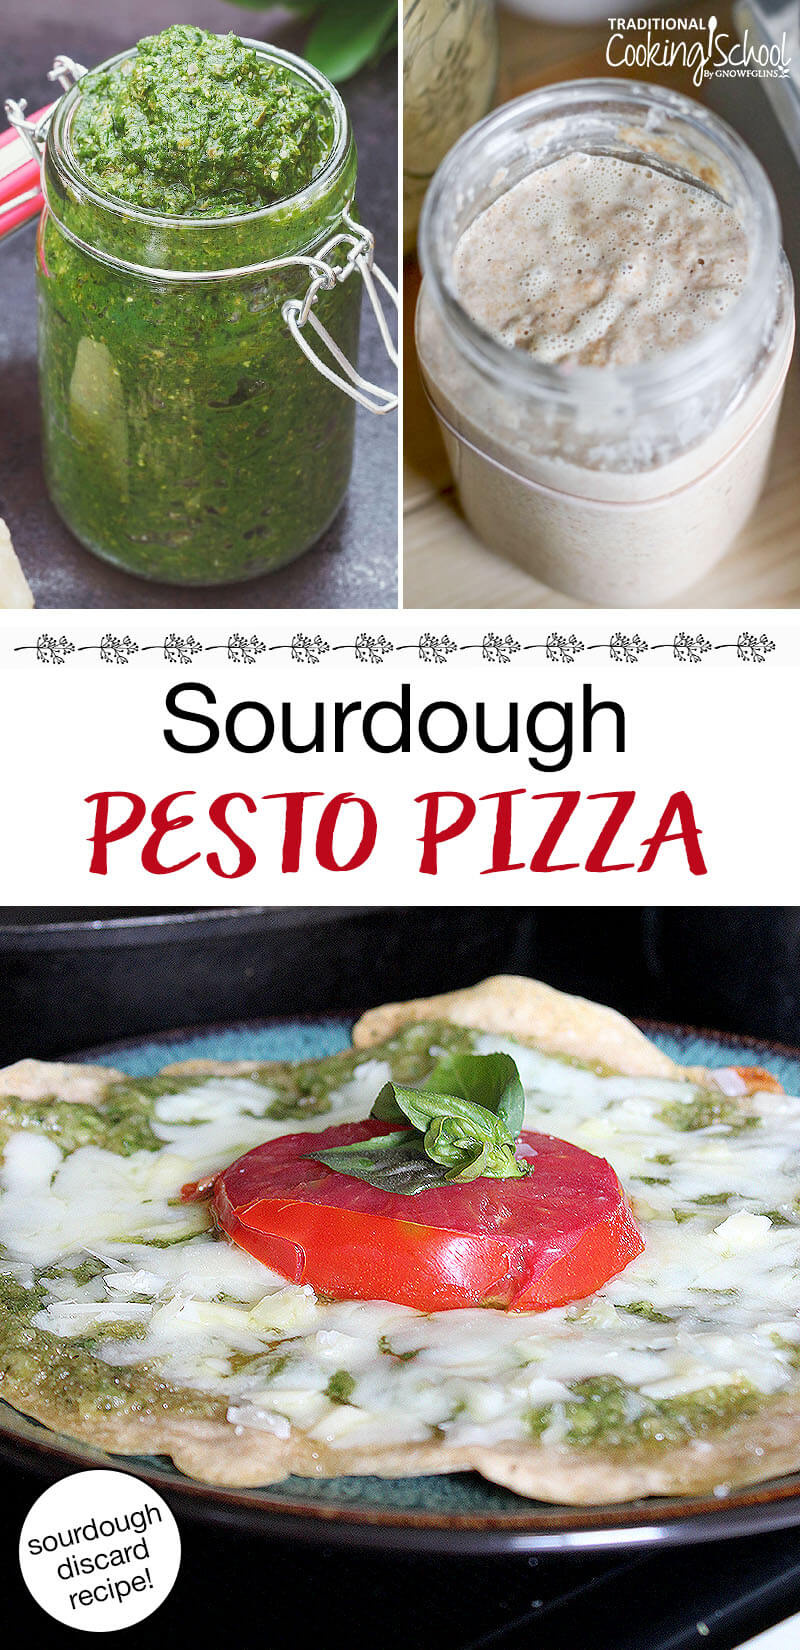 photo collage of pesto, sourdough starter, and cheesy, herbed pizza on a plate. Text overlay says: "Sourdough Pesto Pizza (sourdough discard recipe!)"